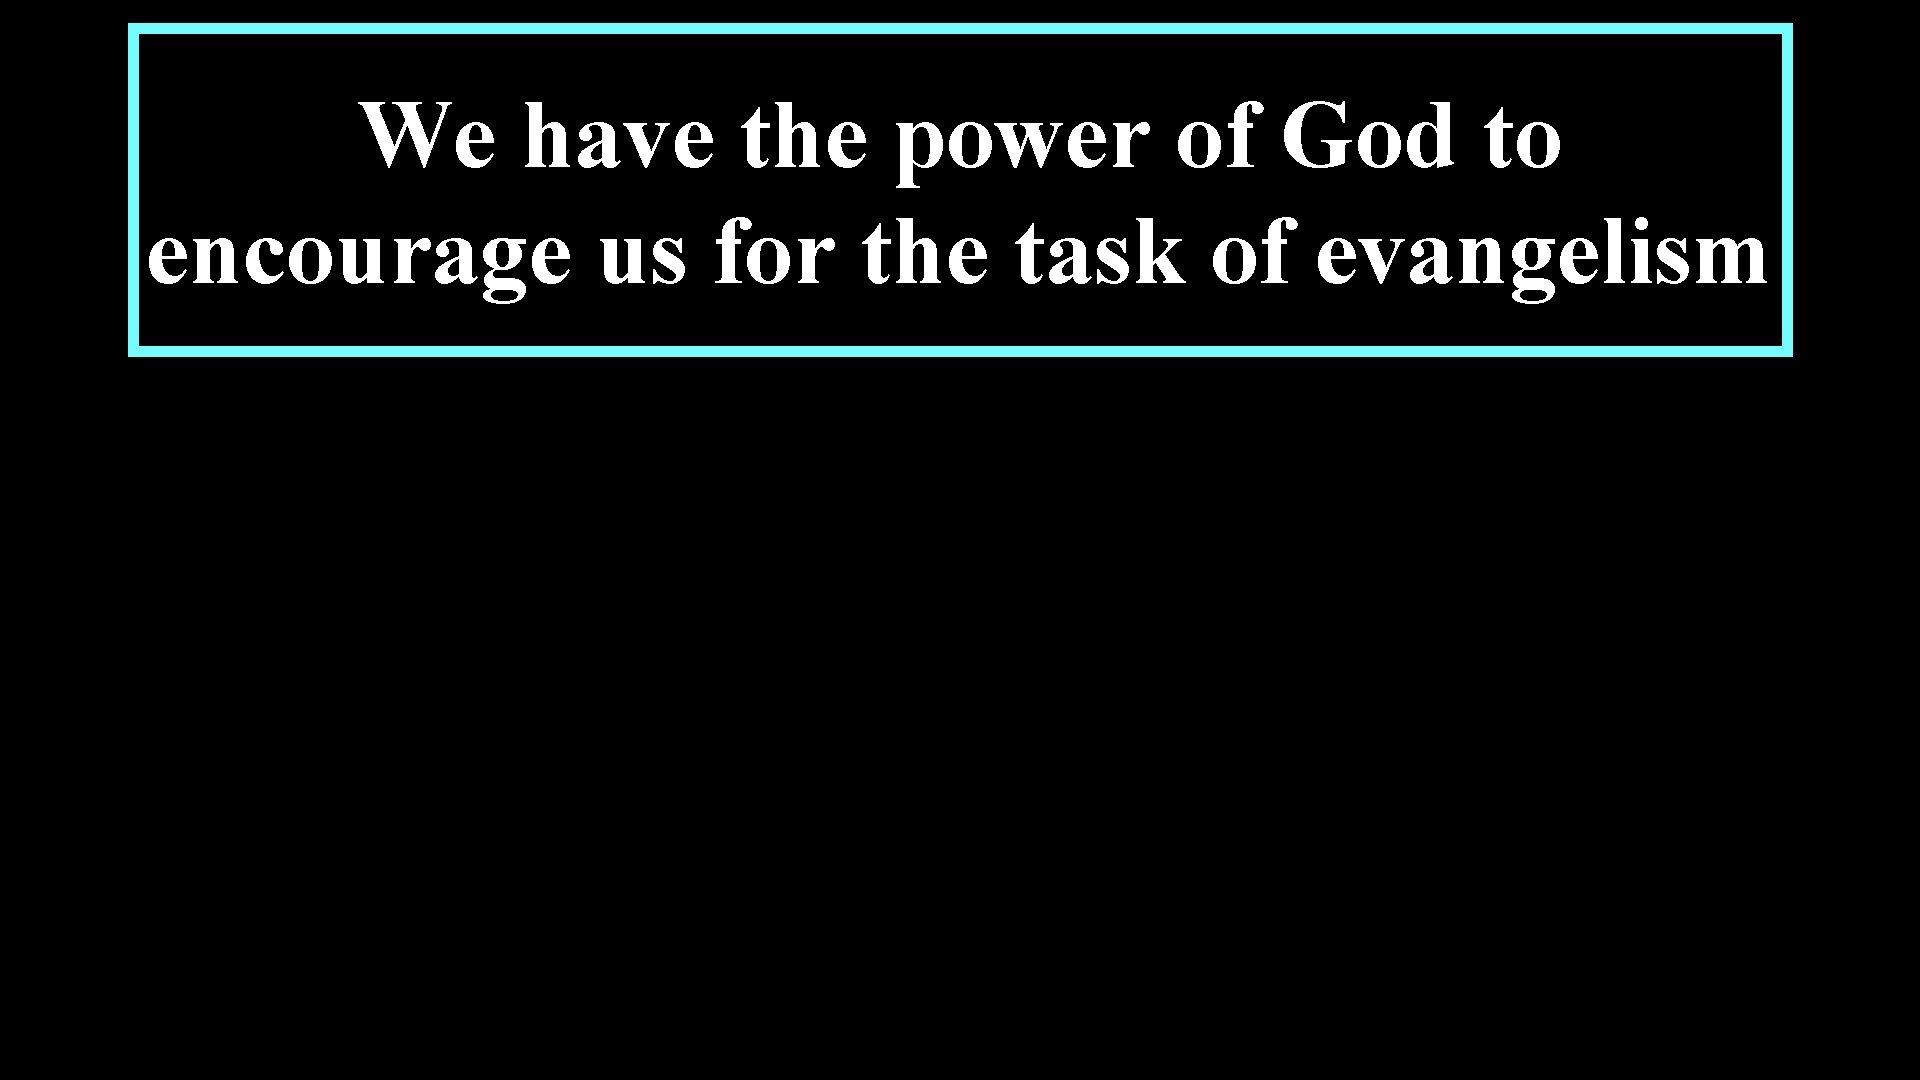 We have the power of God to encourage us for the task of evangelism